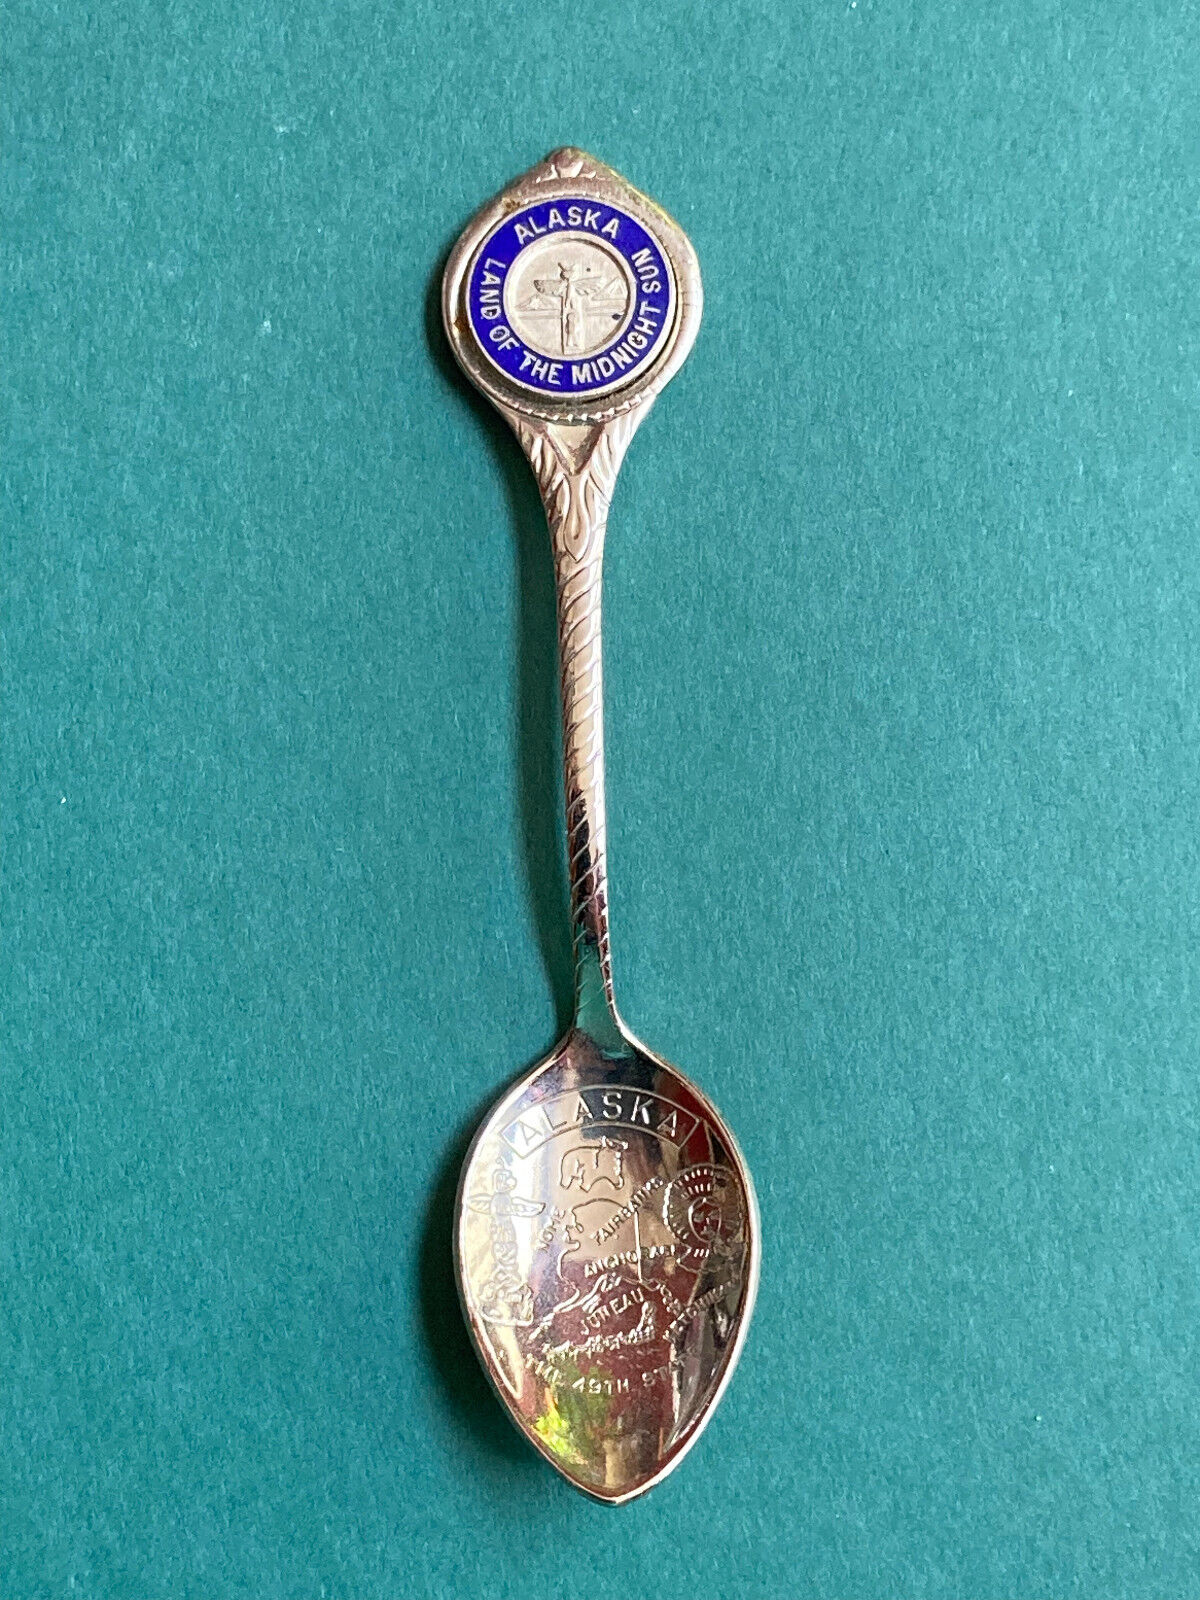 Souvenir Spoons - Choose from 31 Different Spoons - States Places-People-Etc